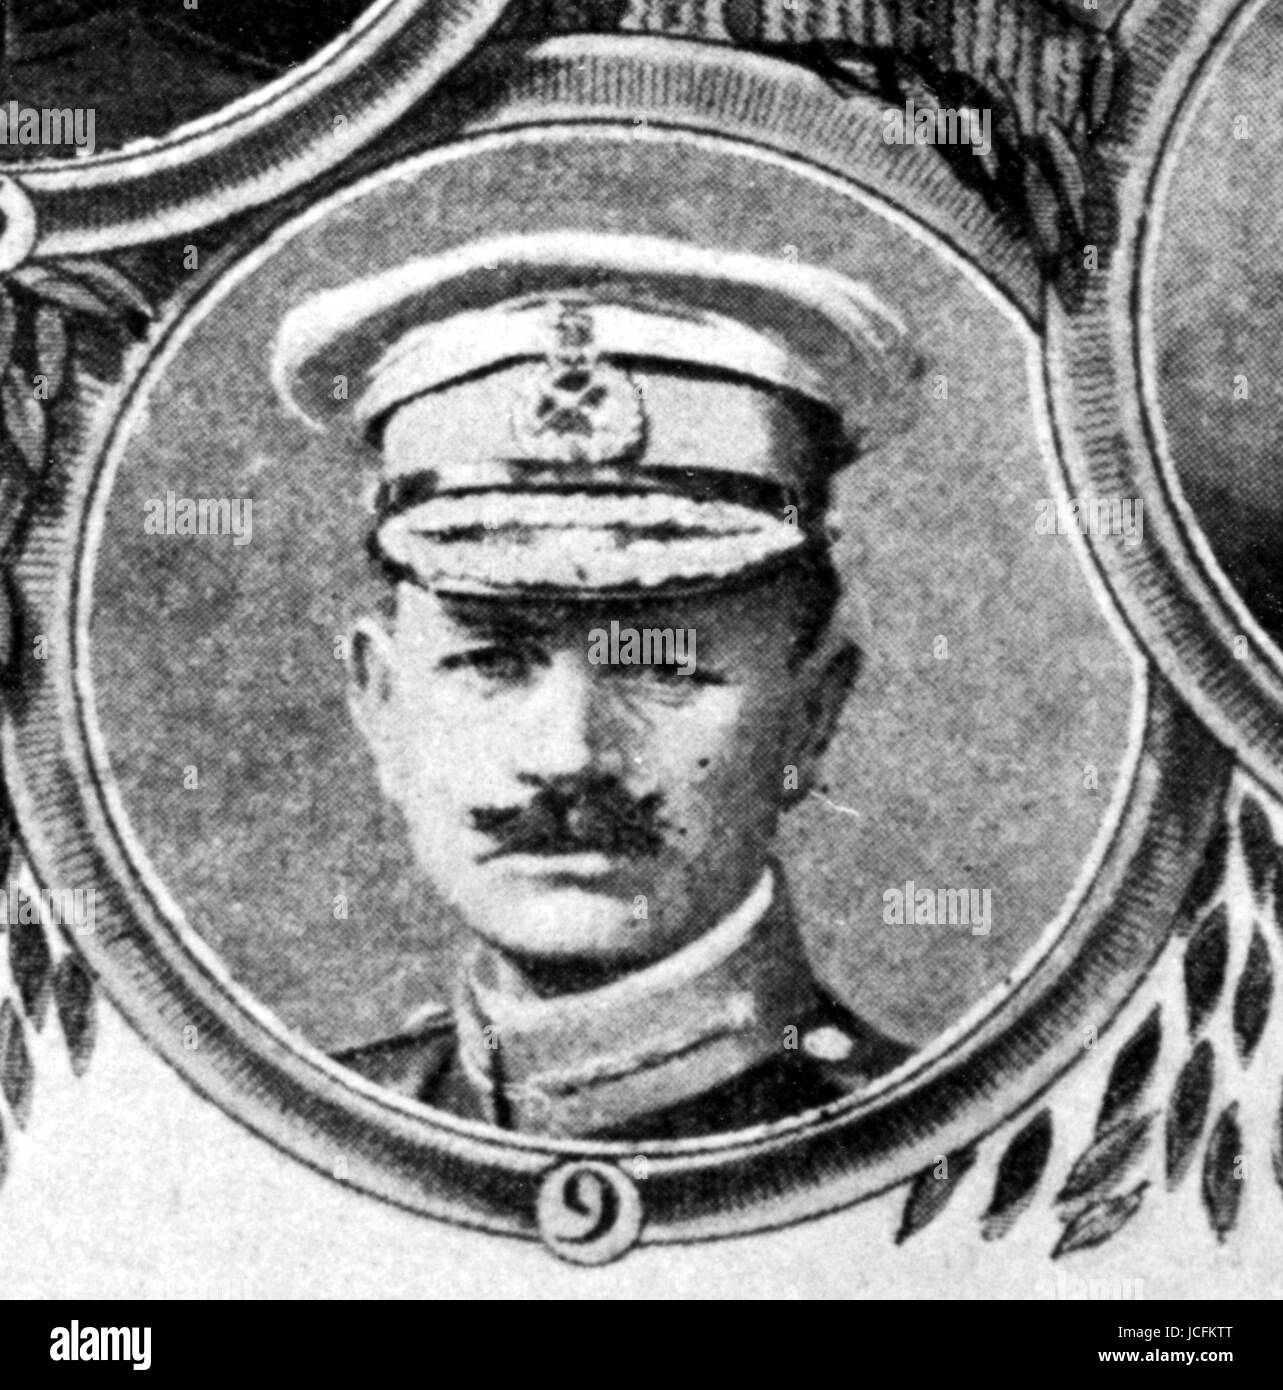 Portrait of Marshal Julian Byng (1862-1935), British army officer who fought during World War I with the British Expeditionary Force in France.  20th century Stock Photo